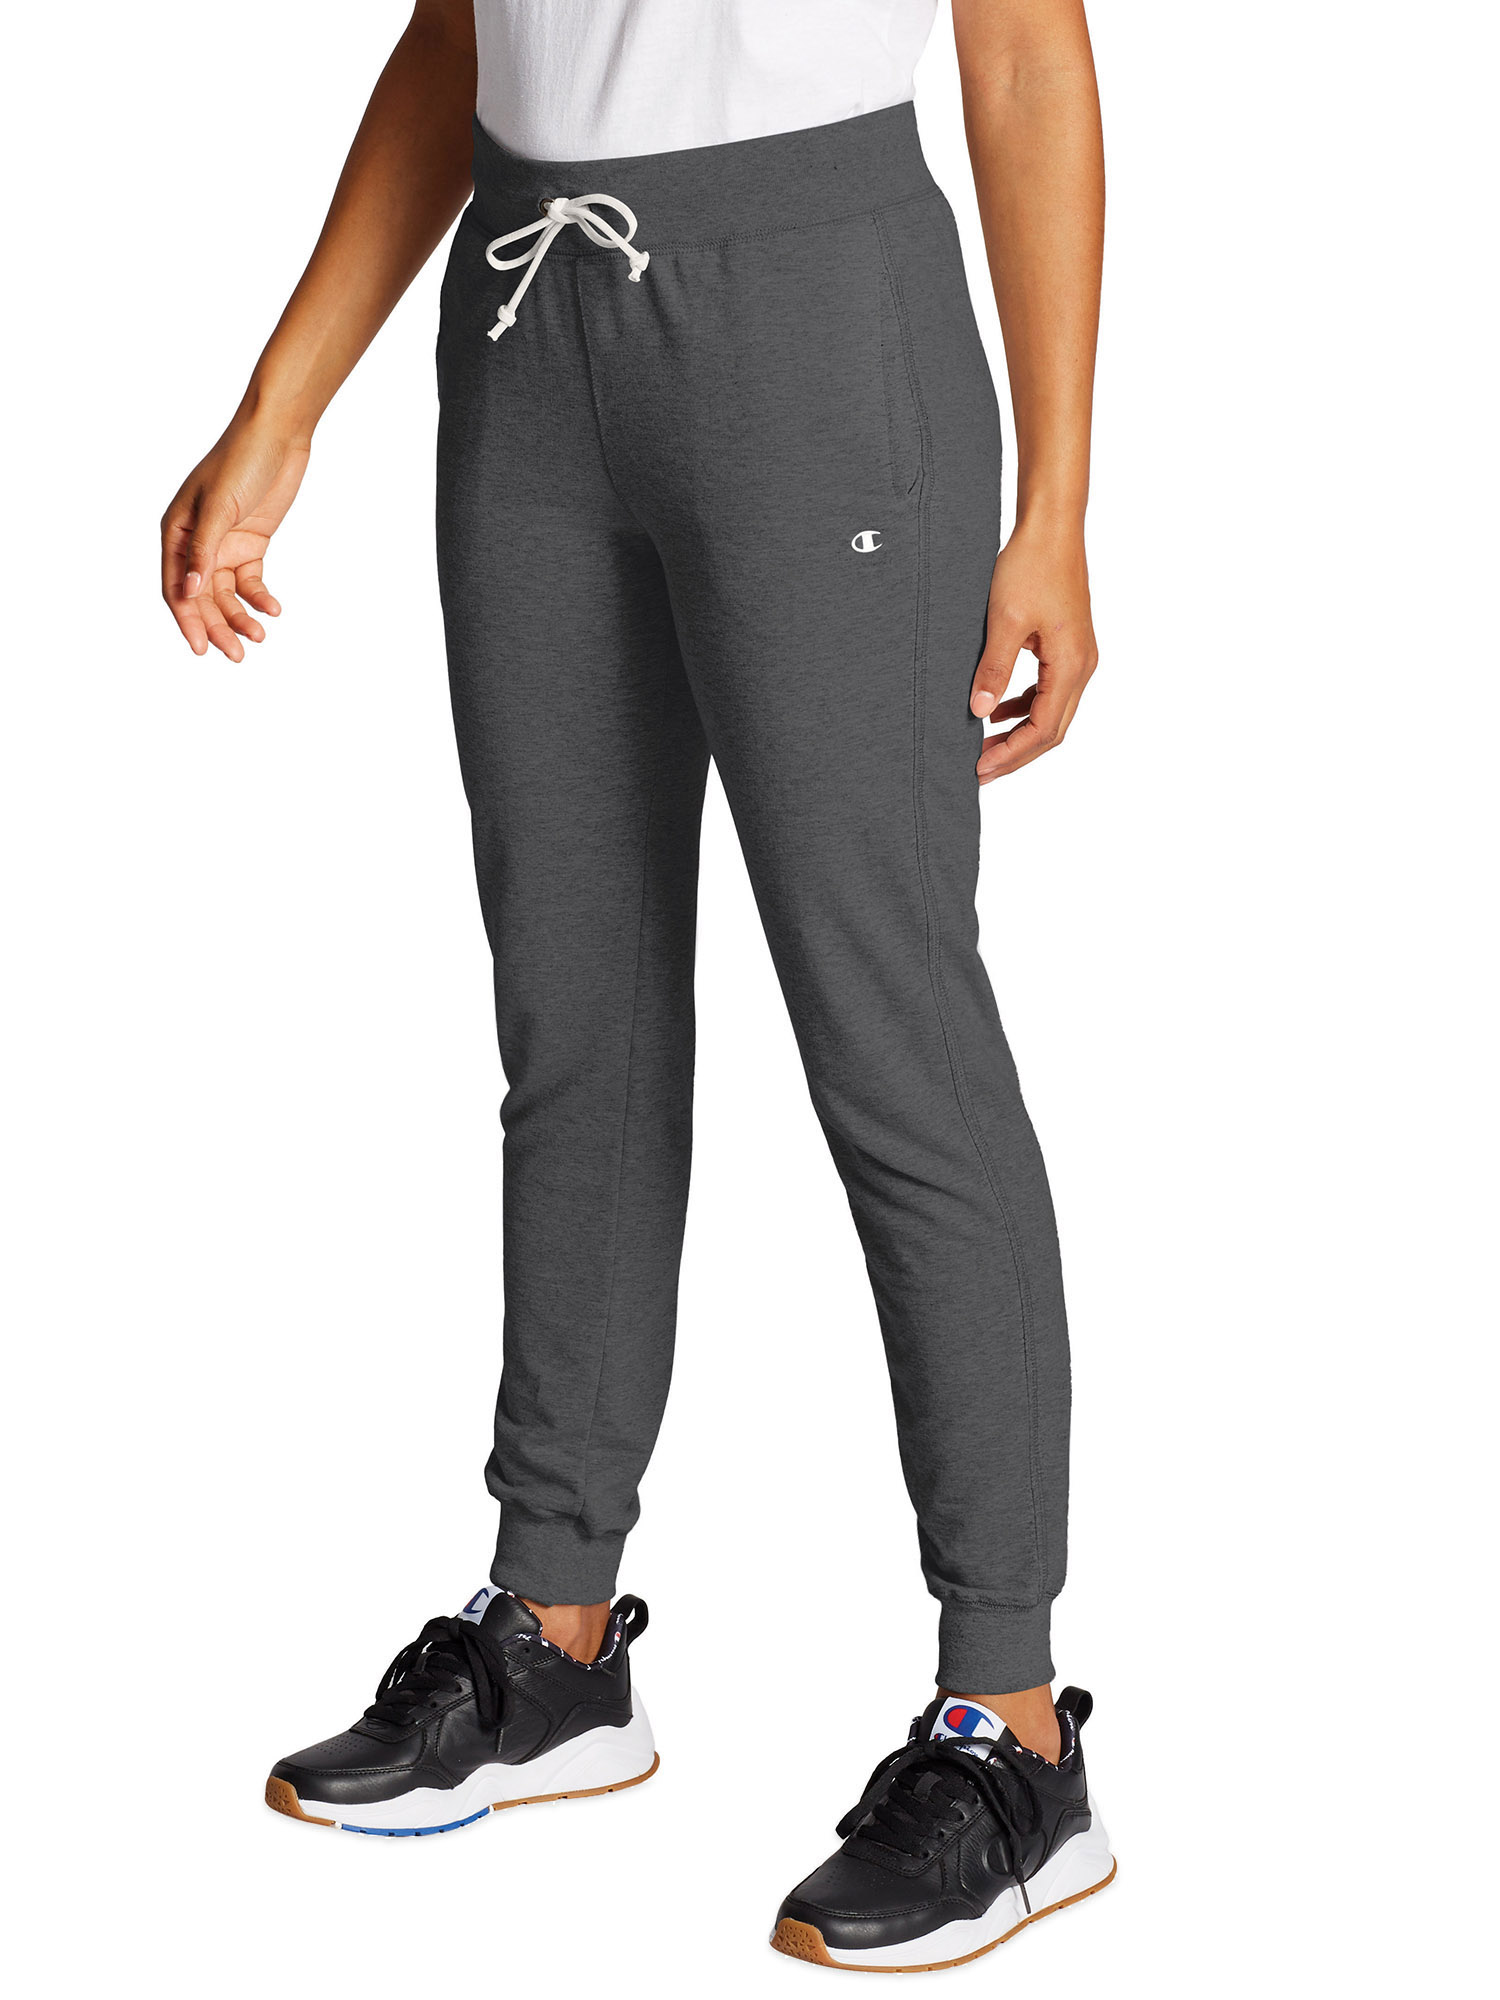 Champion Women`s French Terry Jogger Pants - image 1 of 5